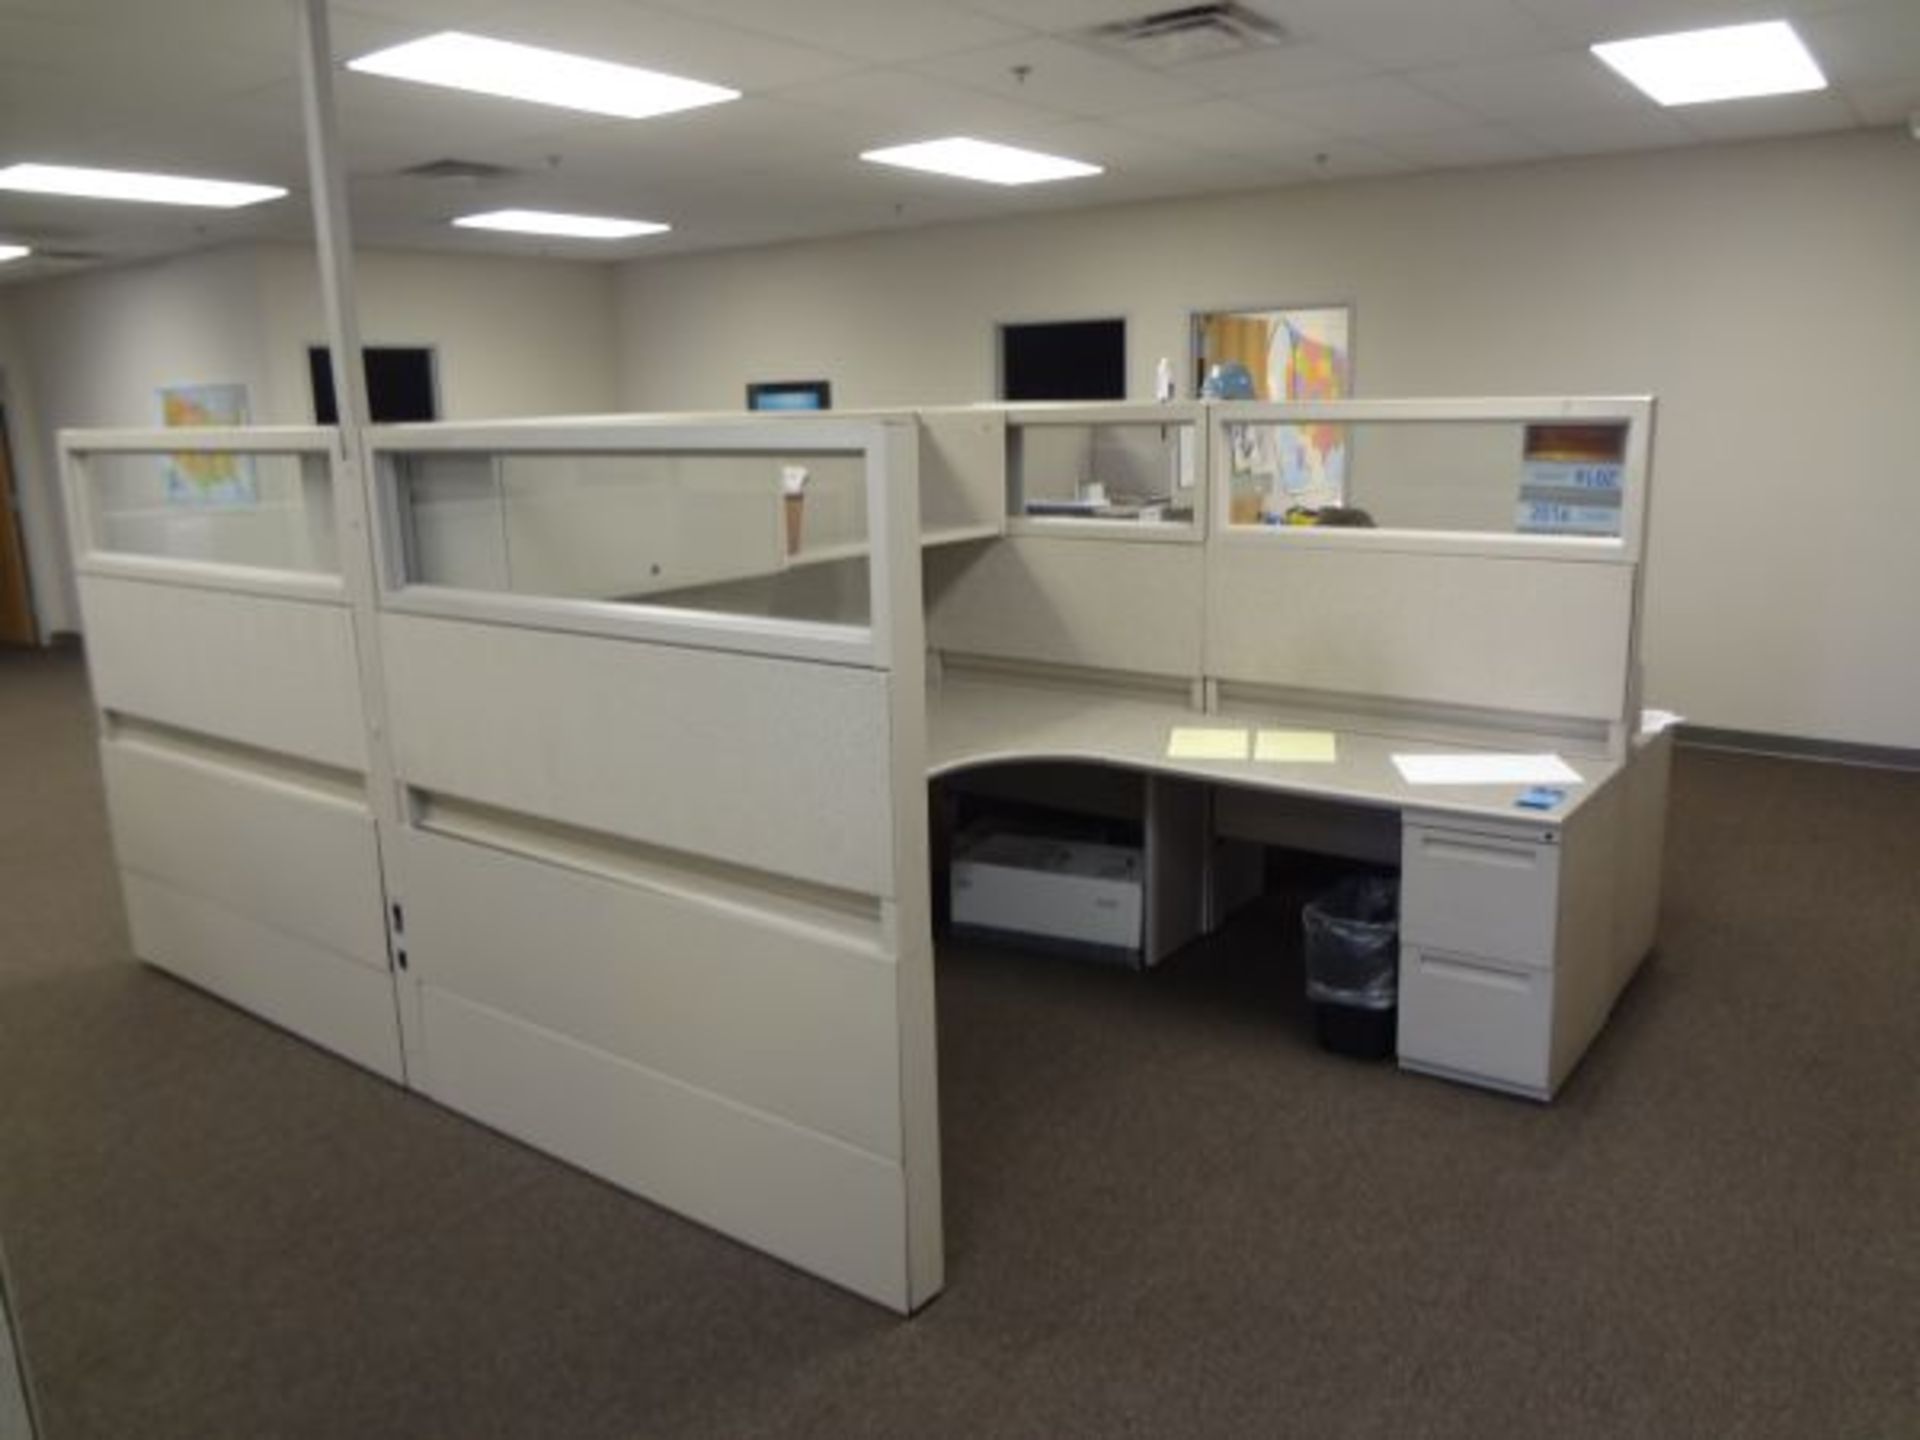 (LOT) 84" X 93" X 65" FOUR-PERSON MARVELL MODULAR OFFICE INCLUDING (1) OVERHEAD CABINET, (1)